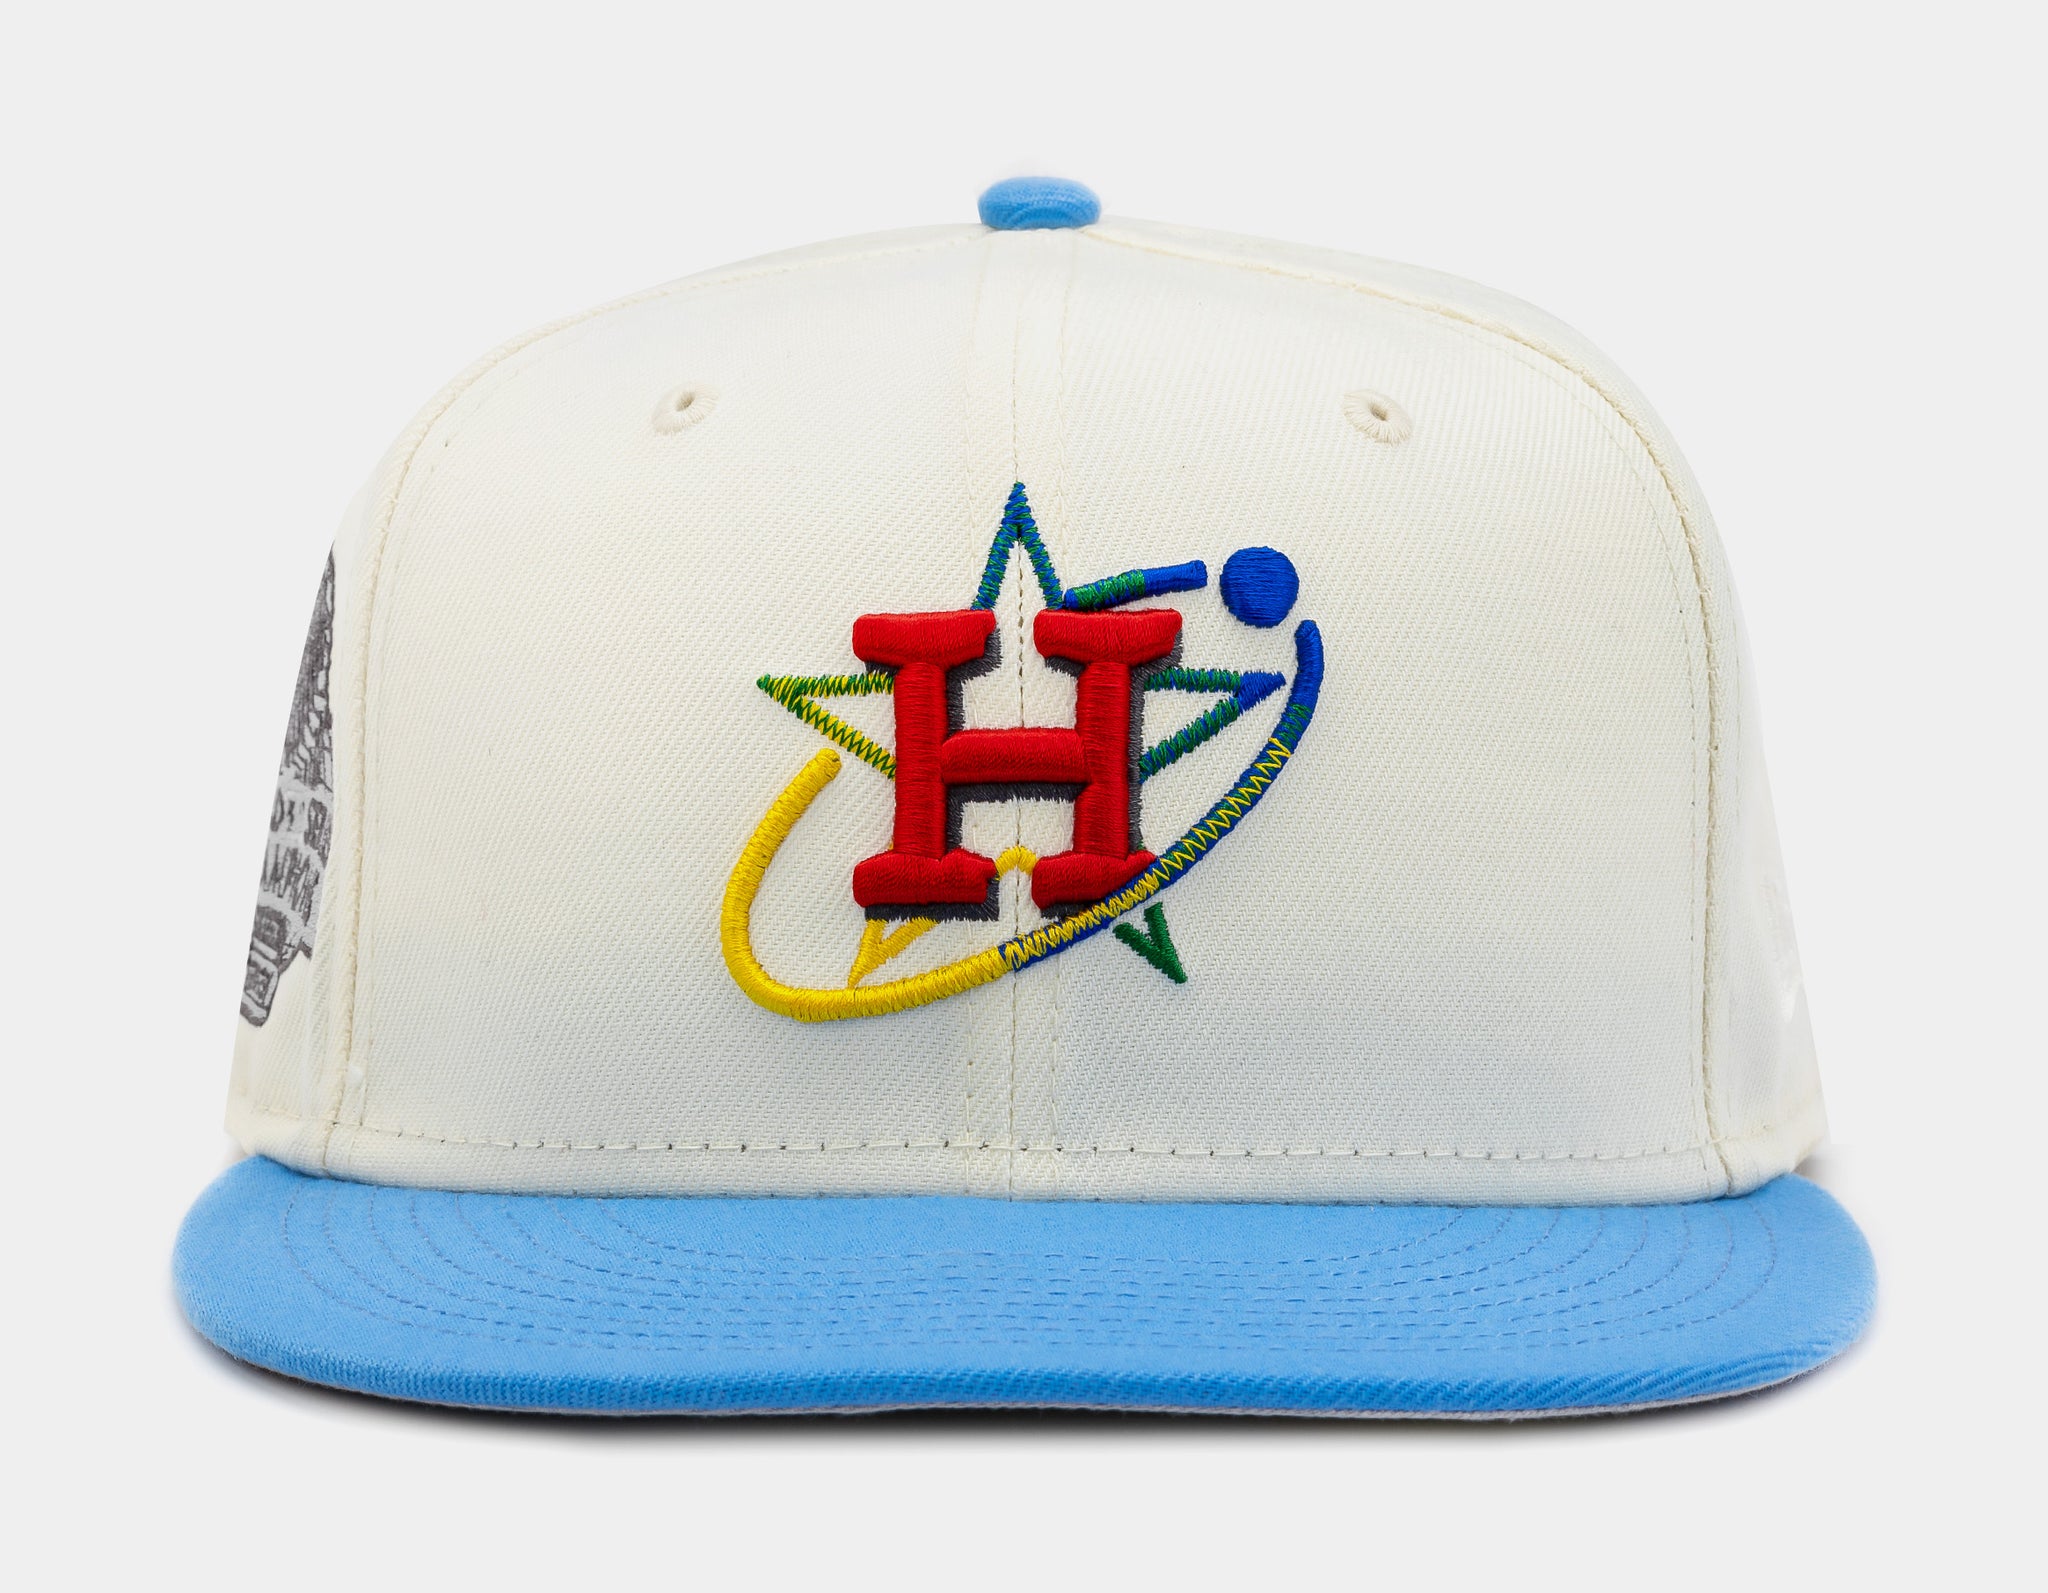 Shoe Palace Exclusive Houston Astros 59Fifty Mens Fitted Hat (White/Blue)